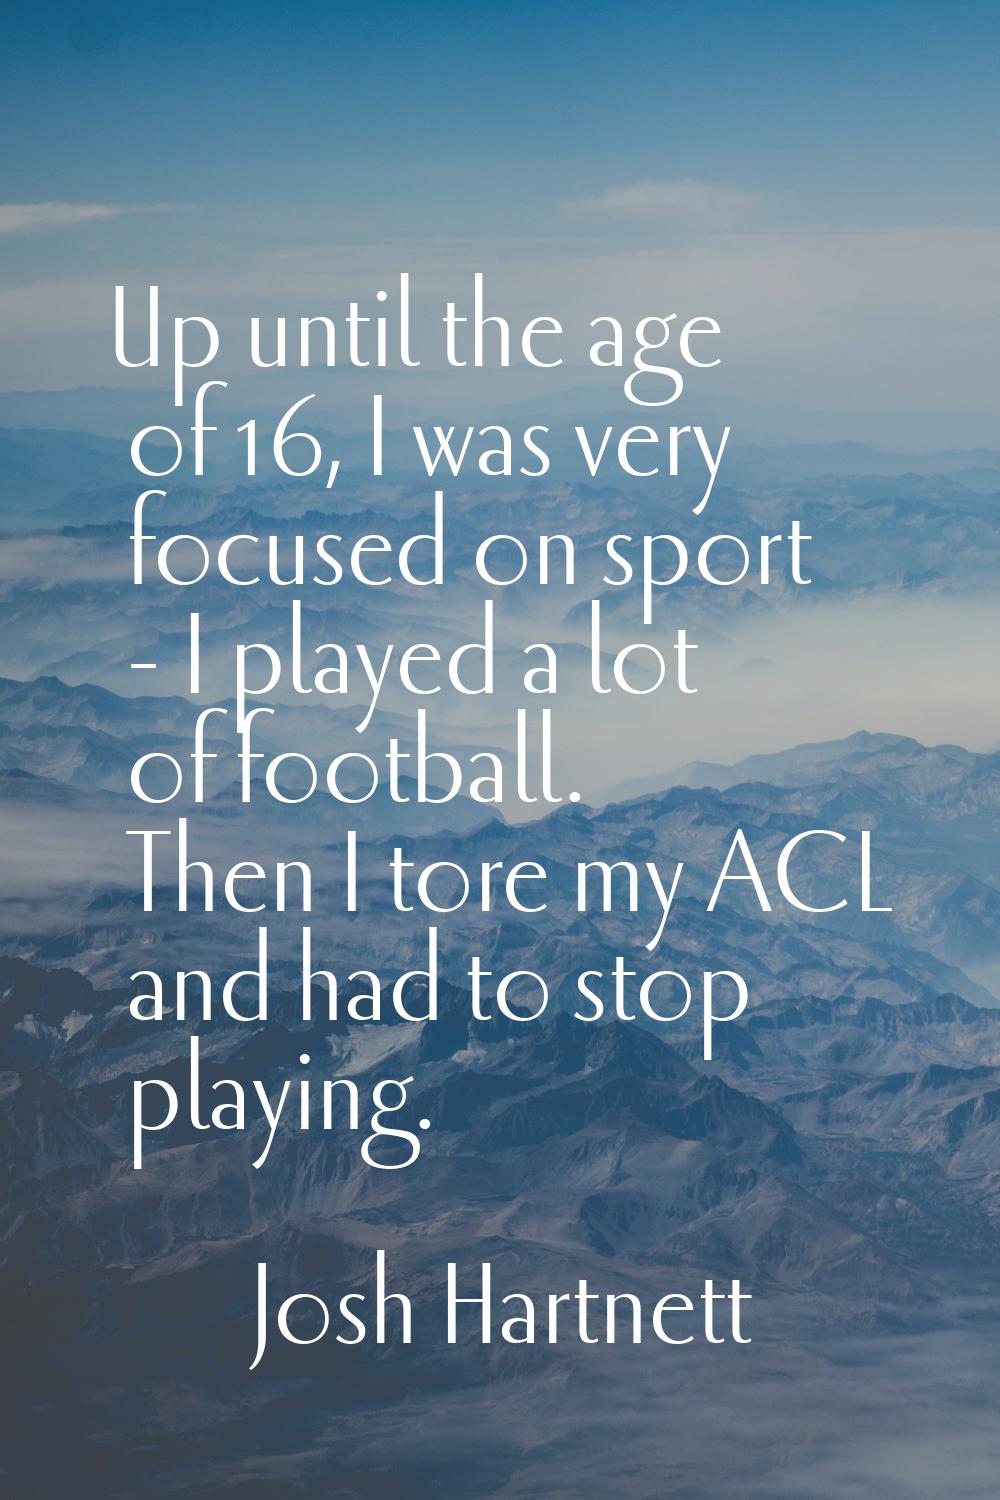 Up until the age of 16, I was very focused on sport - I played a lot of football. Then I tore my AC